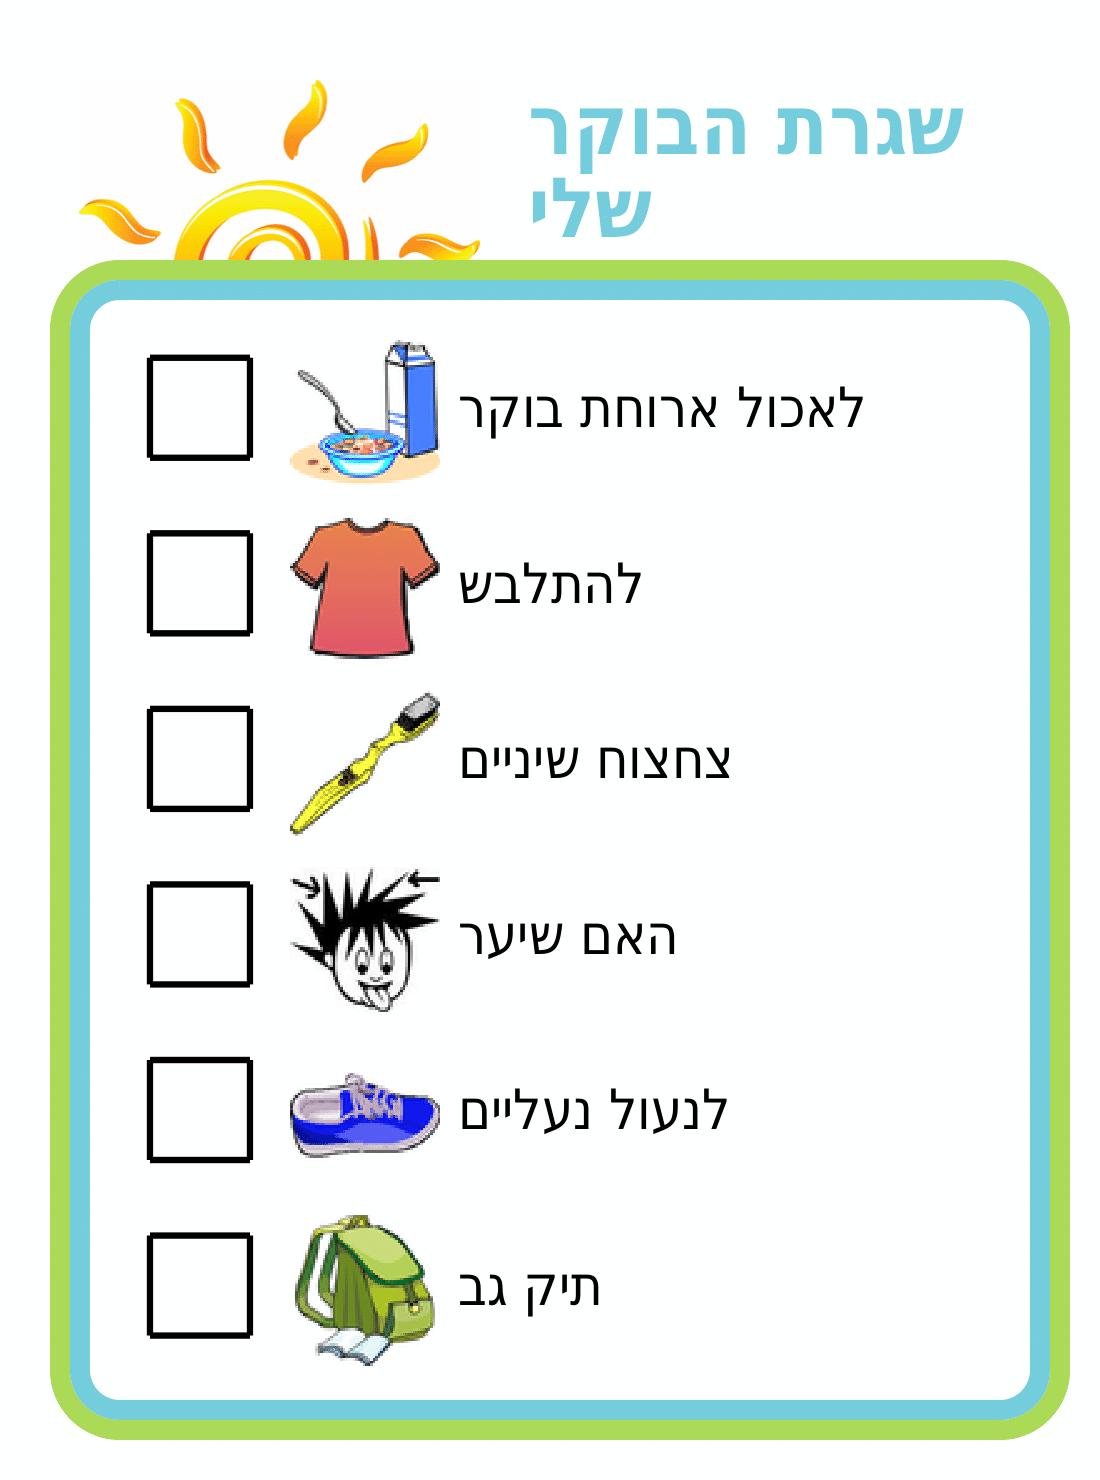 Morning routine picture checklist for kids in hebrew